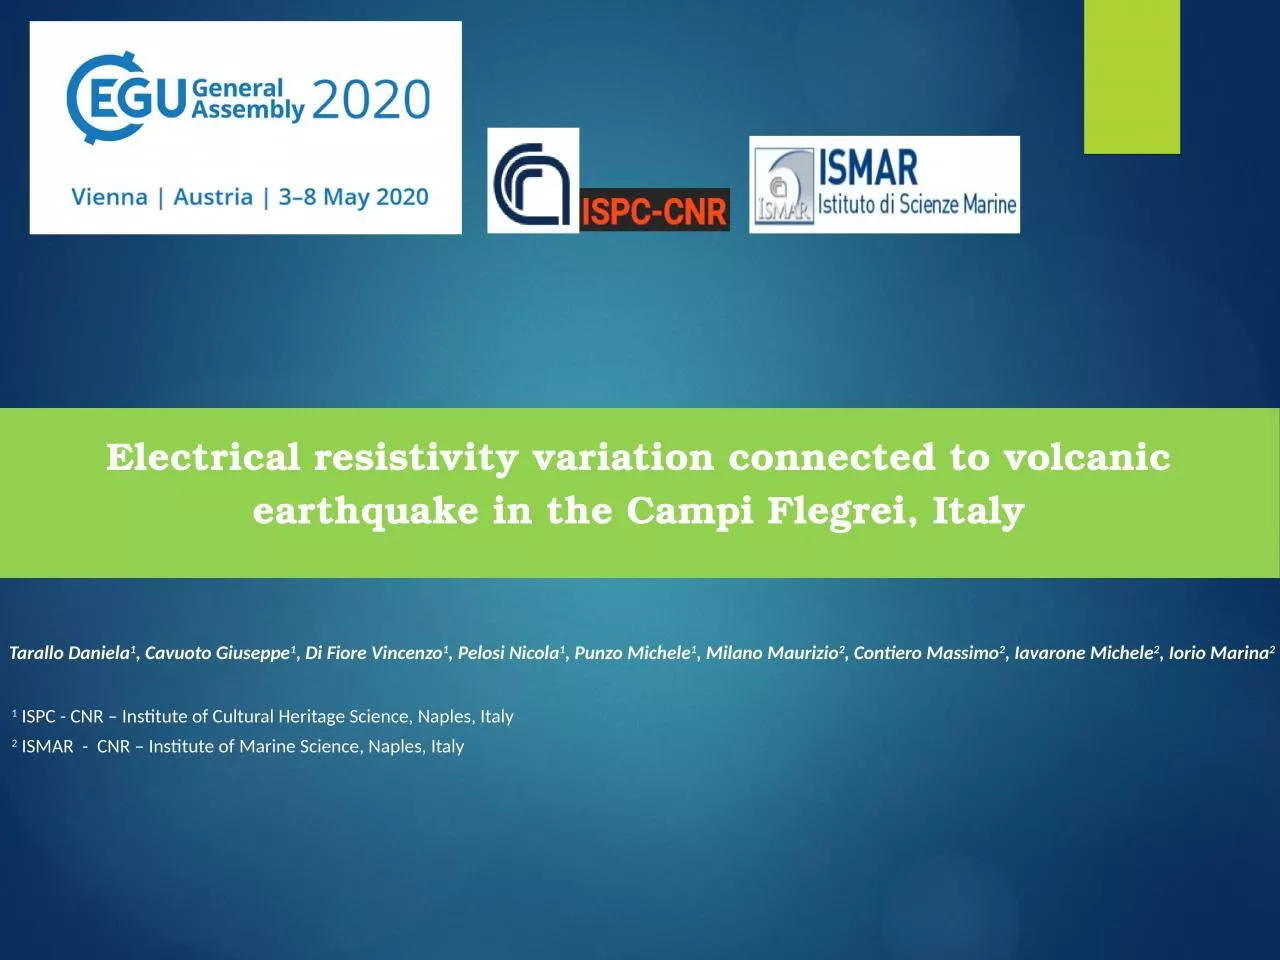 Electrical resistivity variation connected to volcanic earthquake in the